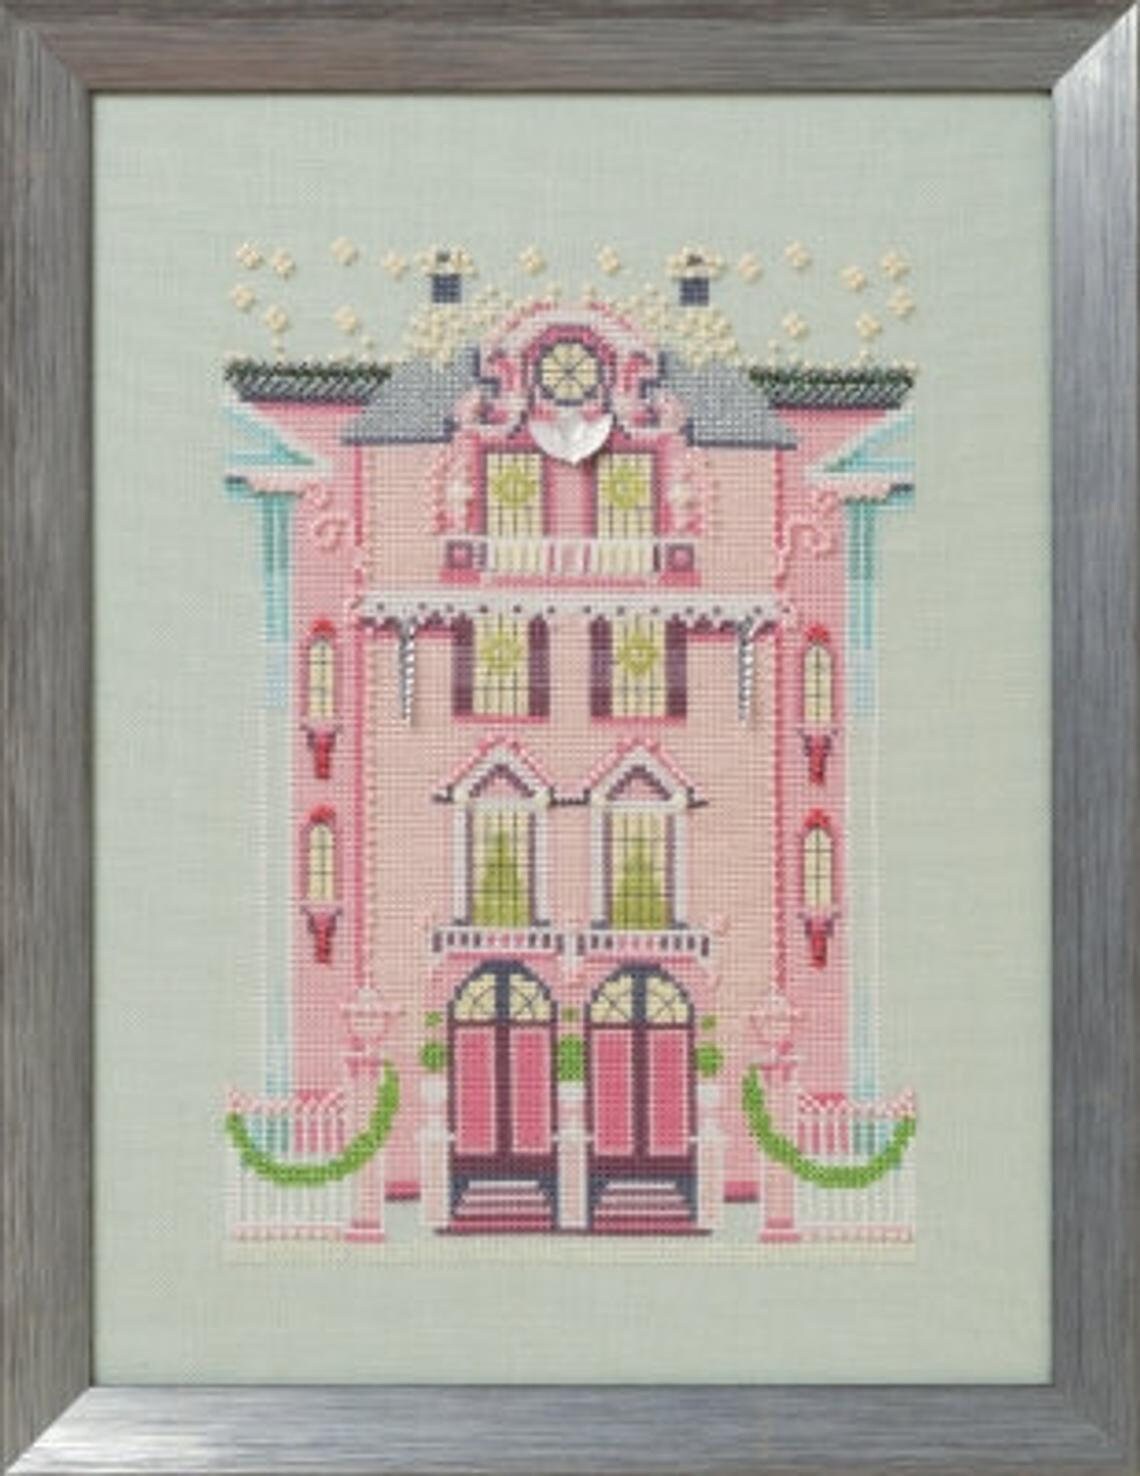 SALE! Complete Xstitch Kit - Pink Edwardian House Holliday Village NC283 by Nora Corbett